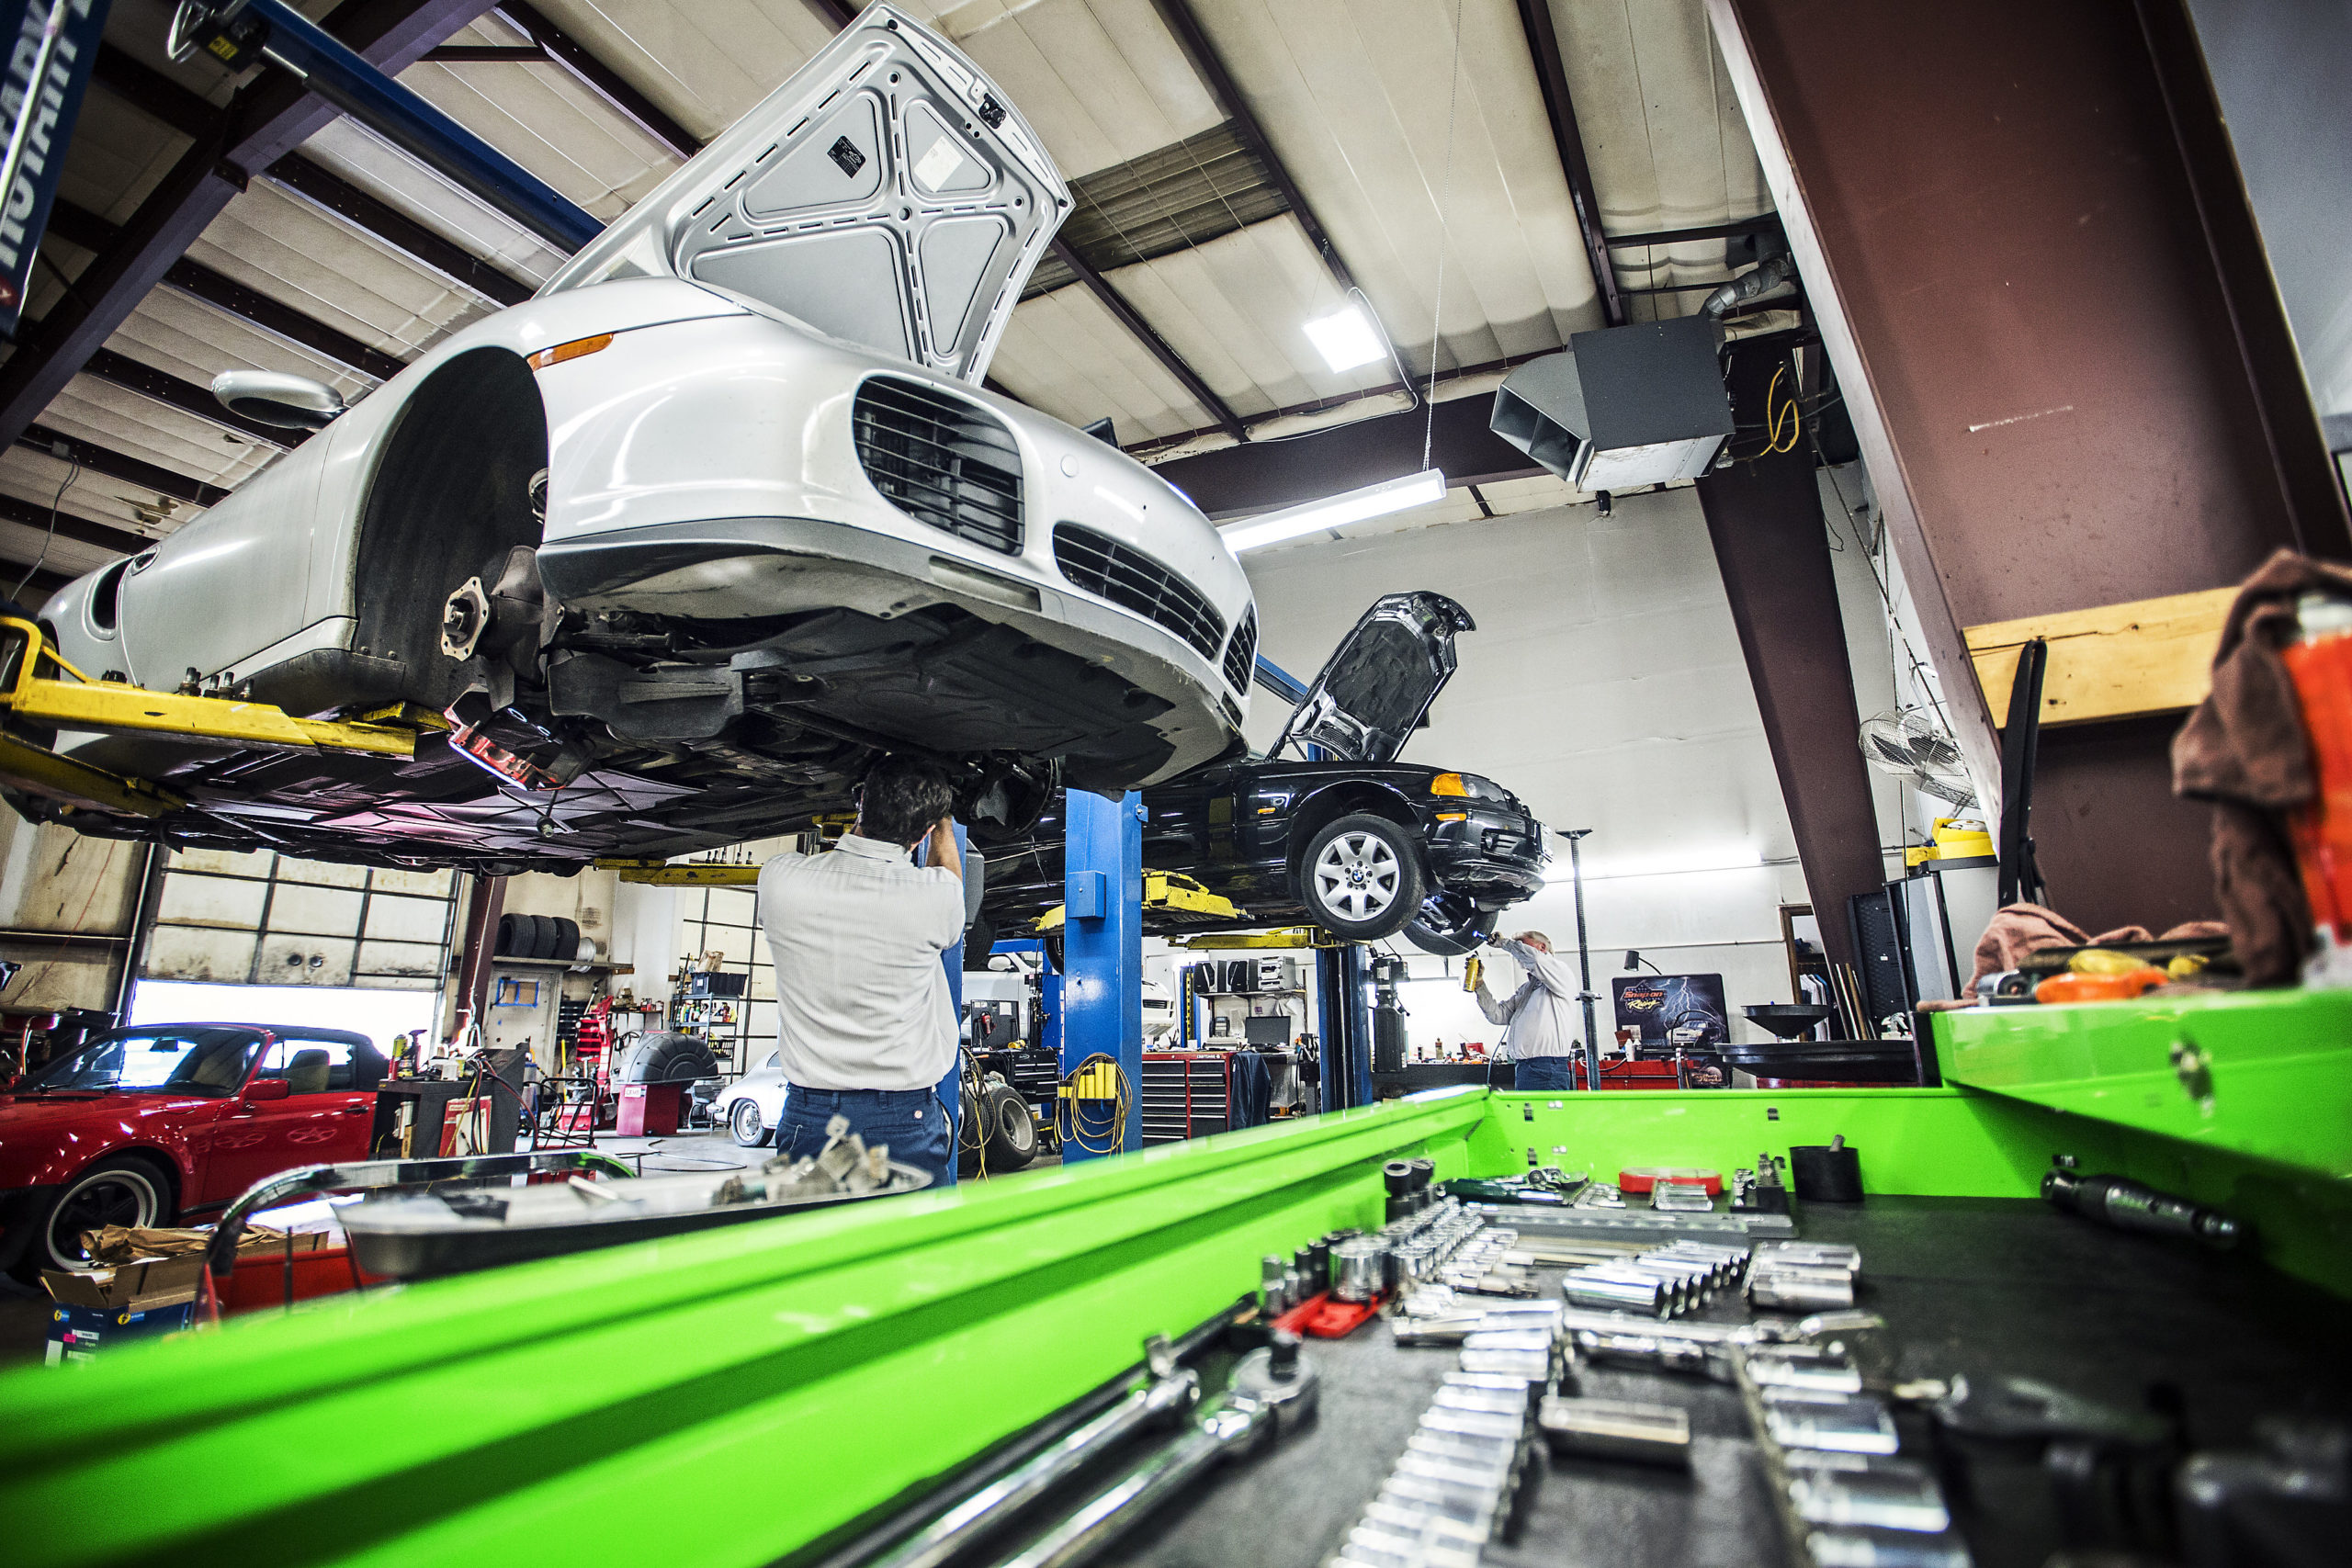 How Poudre Sports Car’s Service Outshines the Rest